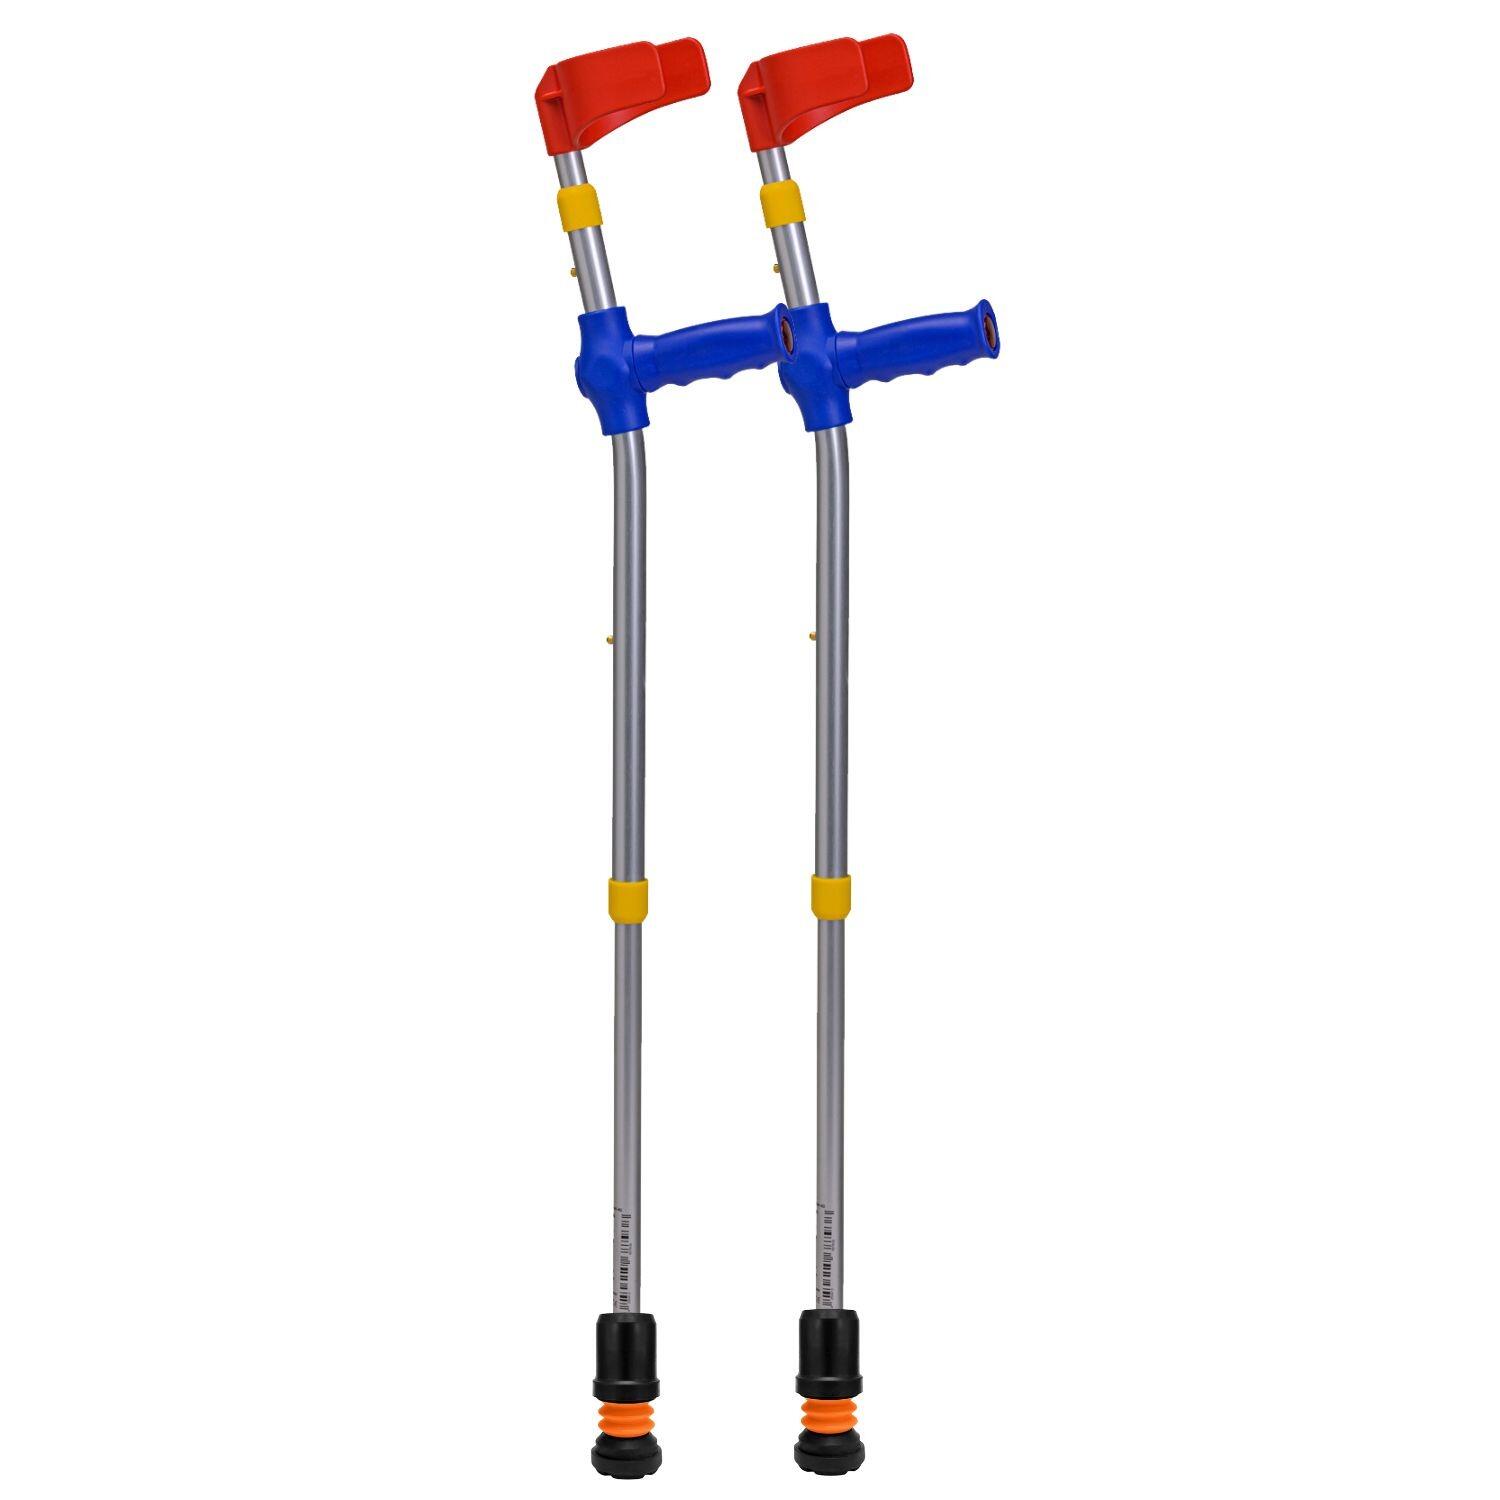 Flexyfoot Soft Grip Double Adjustable Kids Crutches - Blue Handle - Full Crutches